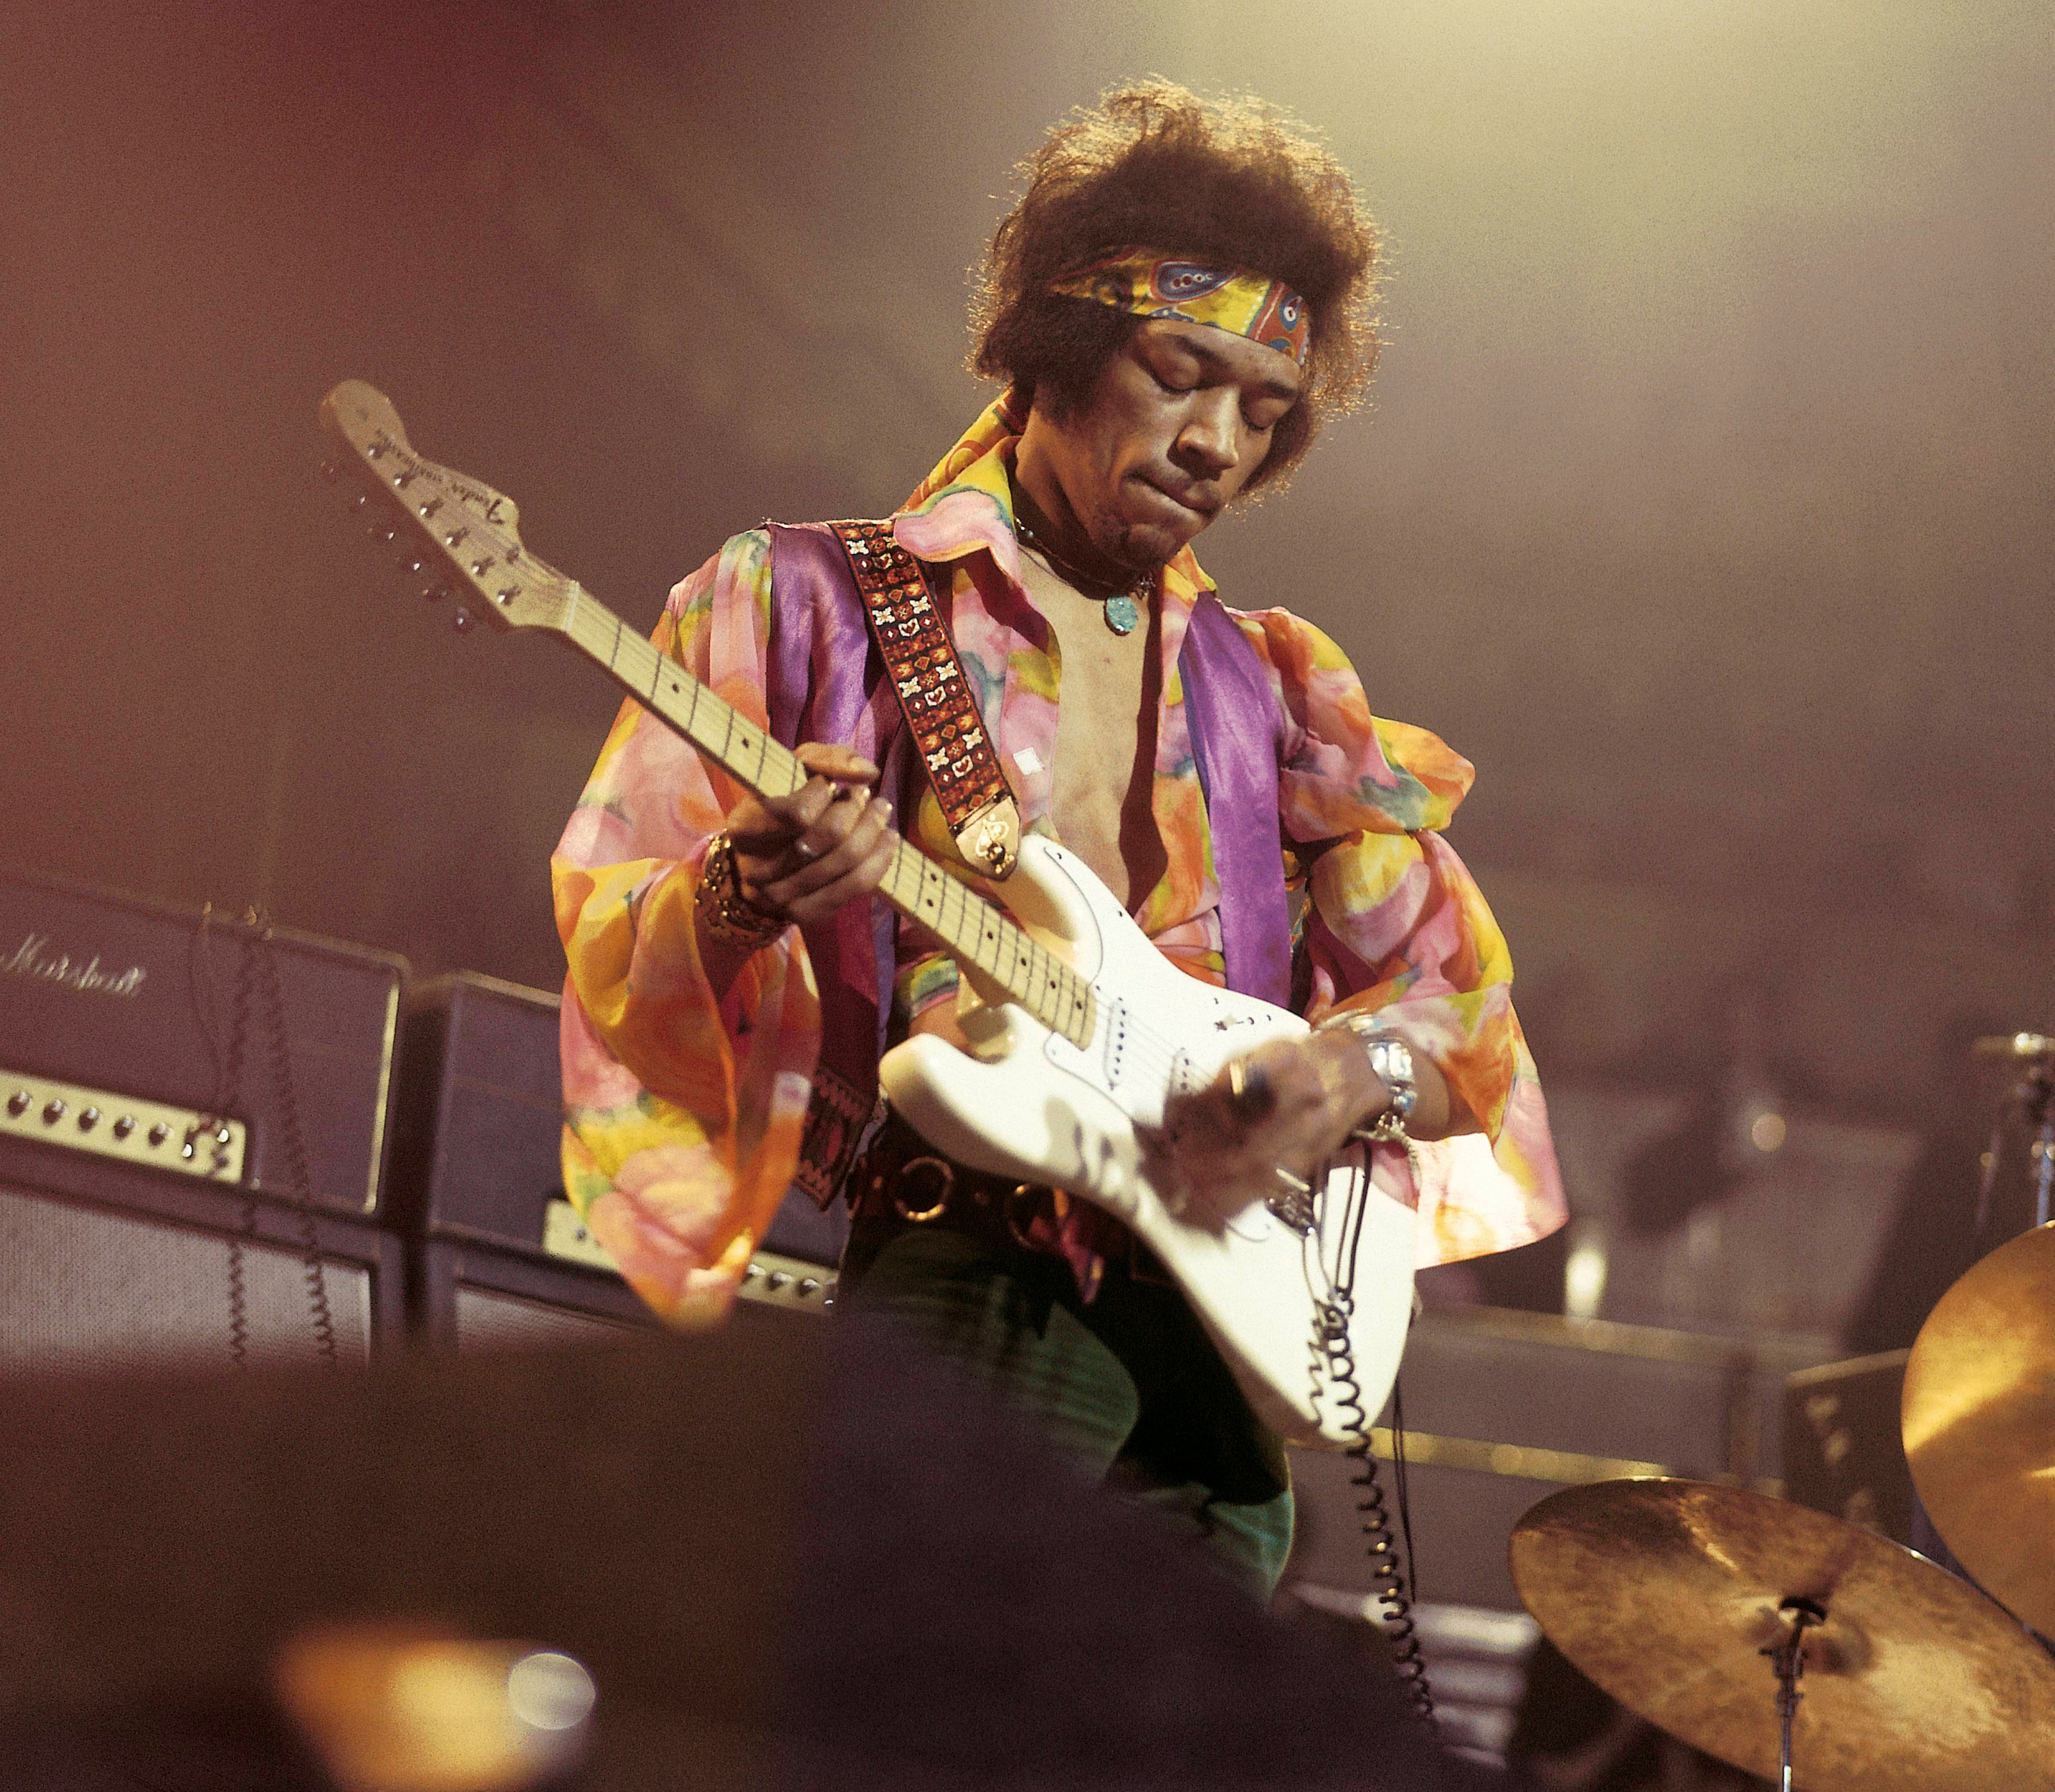 The great Jimi Hendrix apparently confused the site for a popular London nightclub